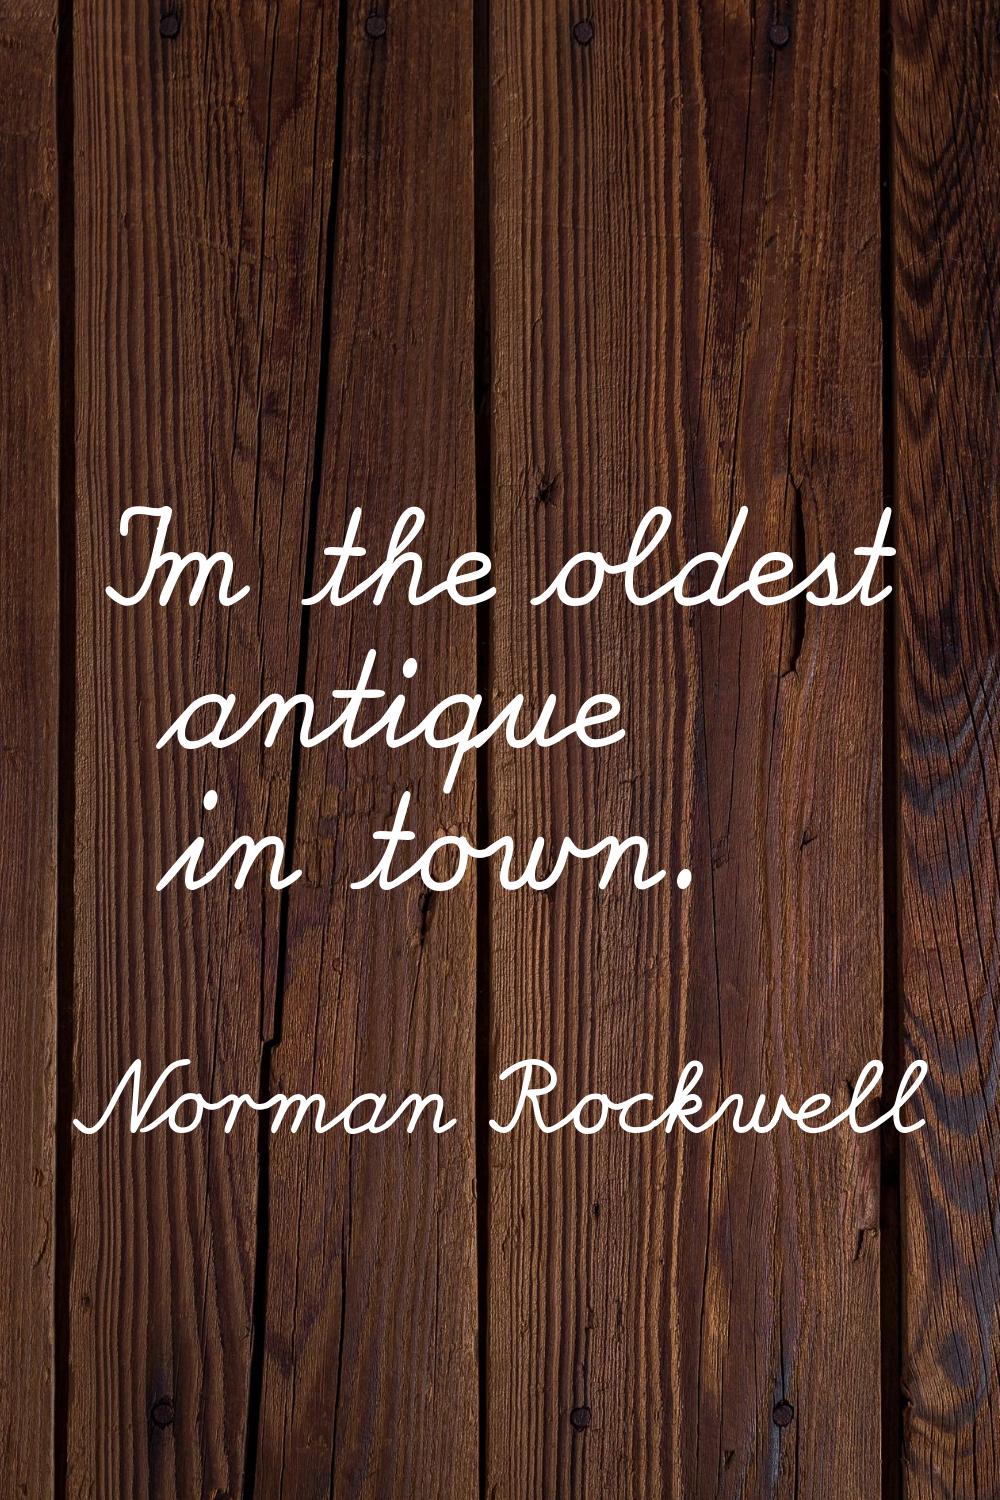 I'm the oldest antique in town.